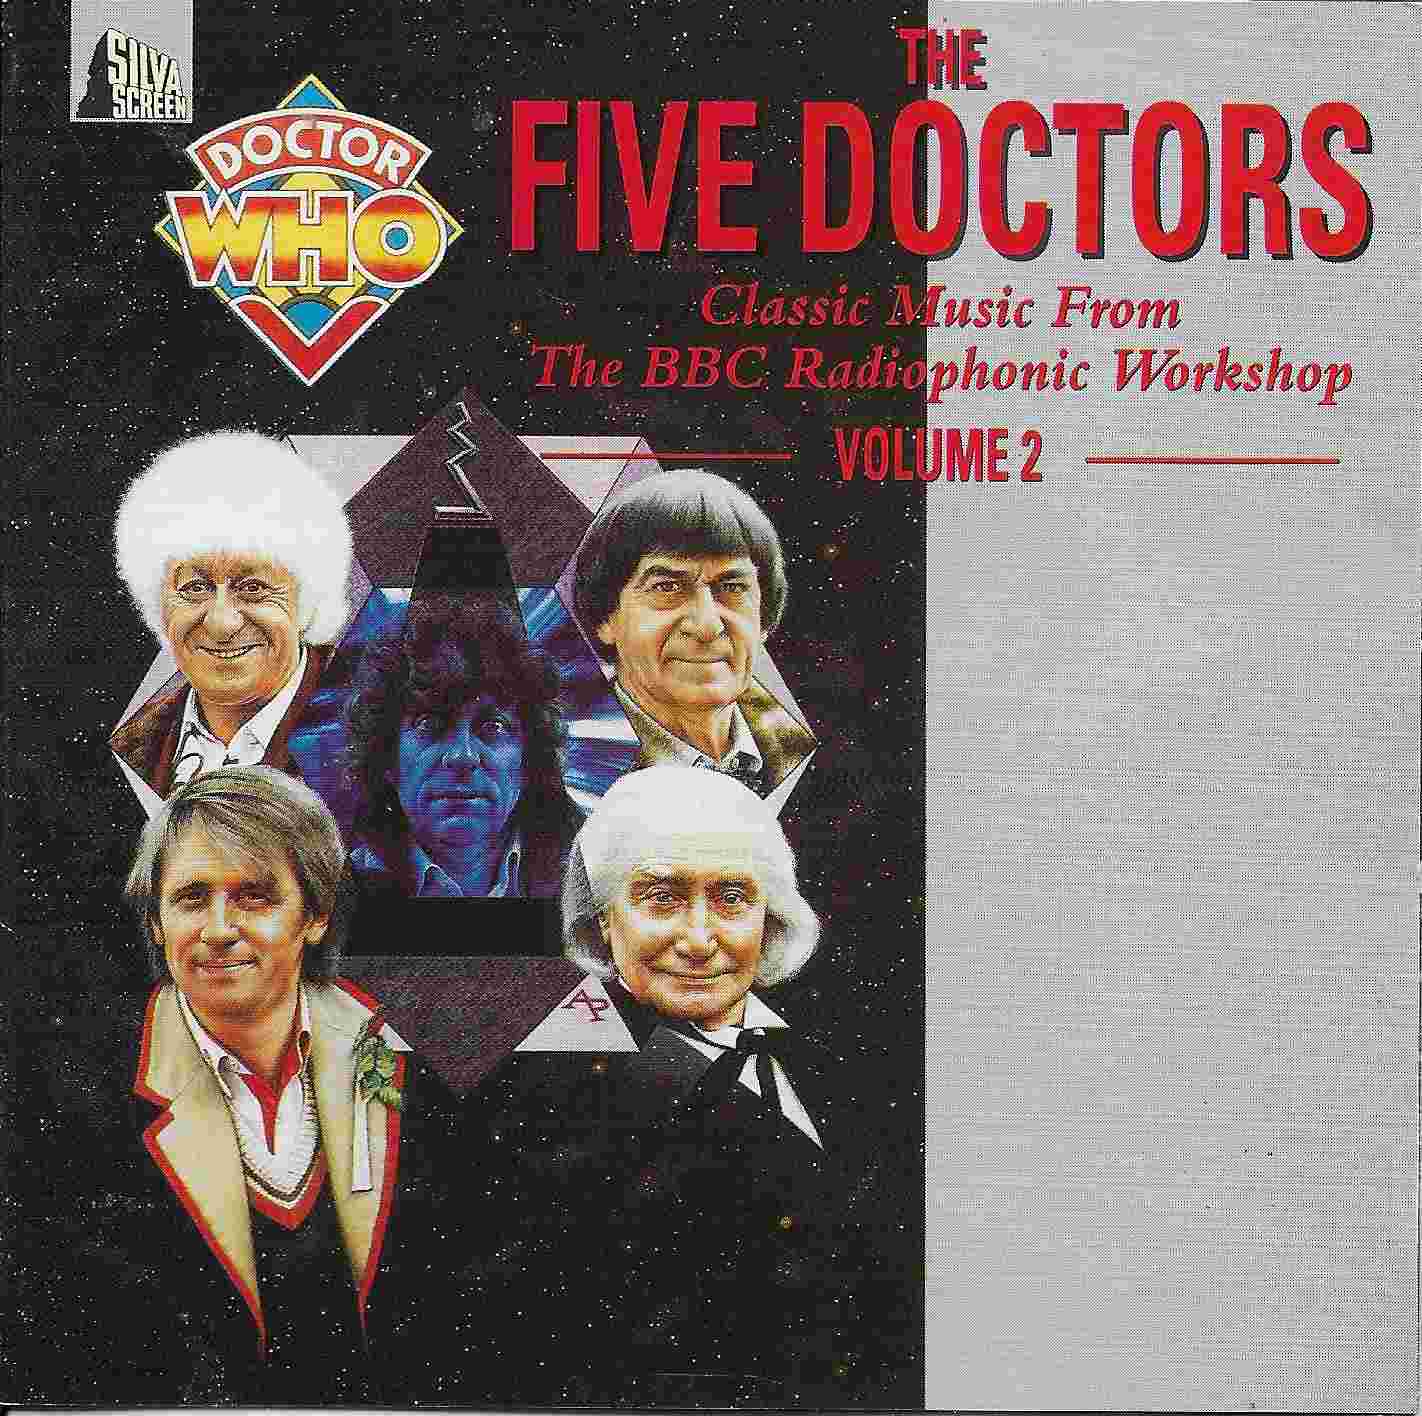 Picture of The five doctors - Doctor who the music - Volume 2 by artist Various from the BBC cds - Records and Tapes library